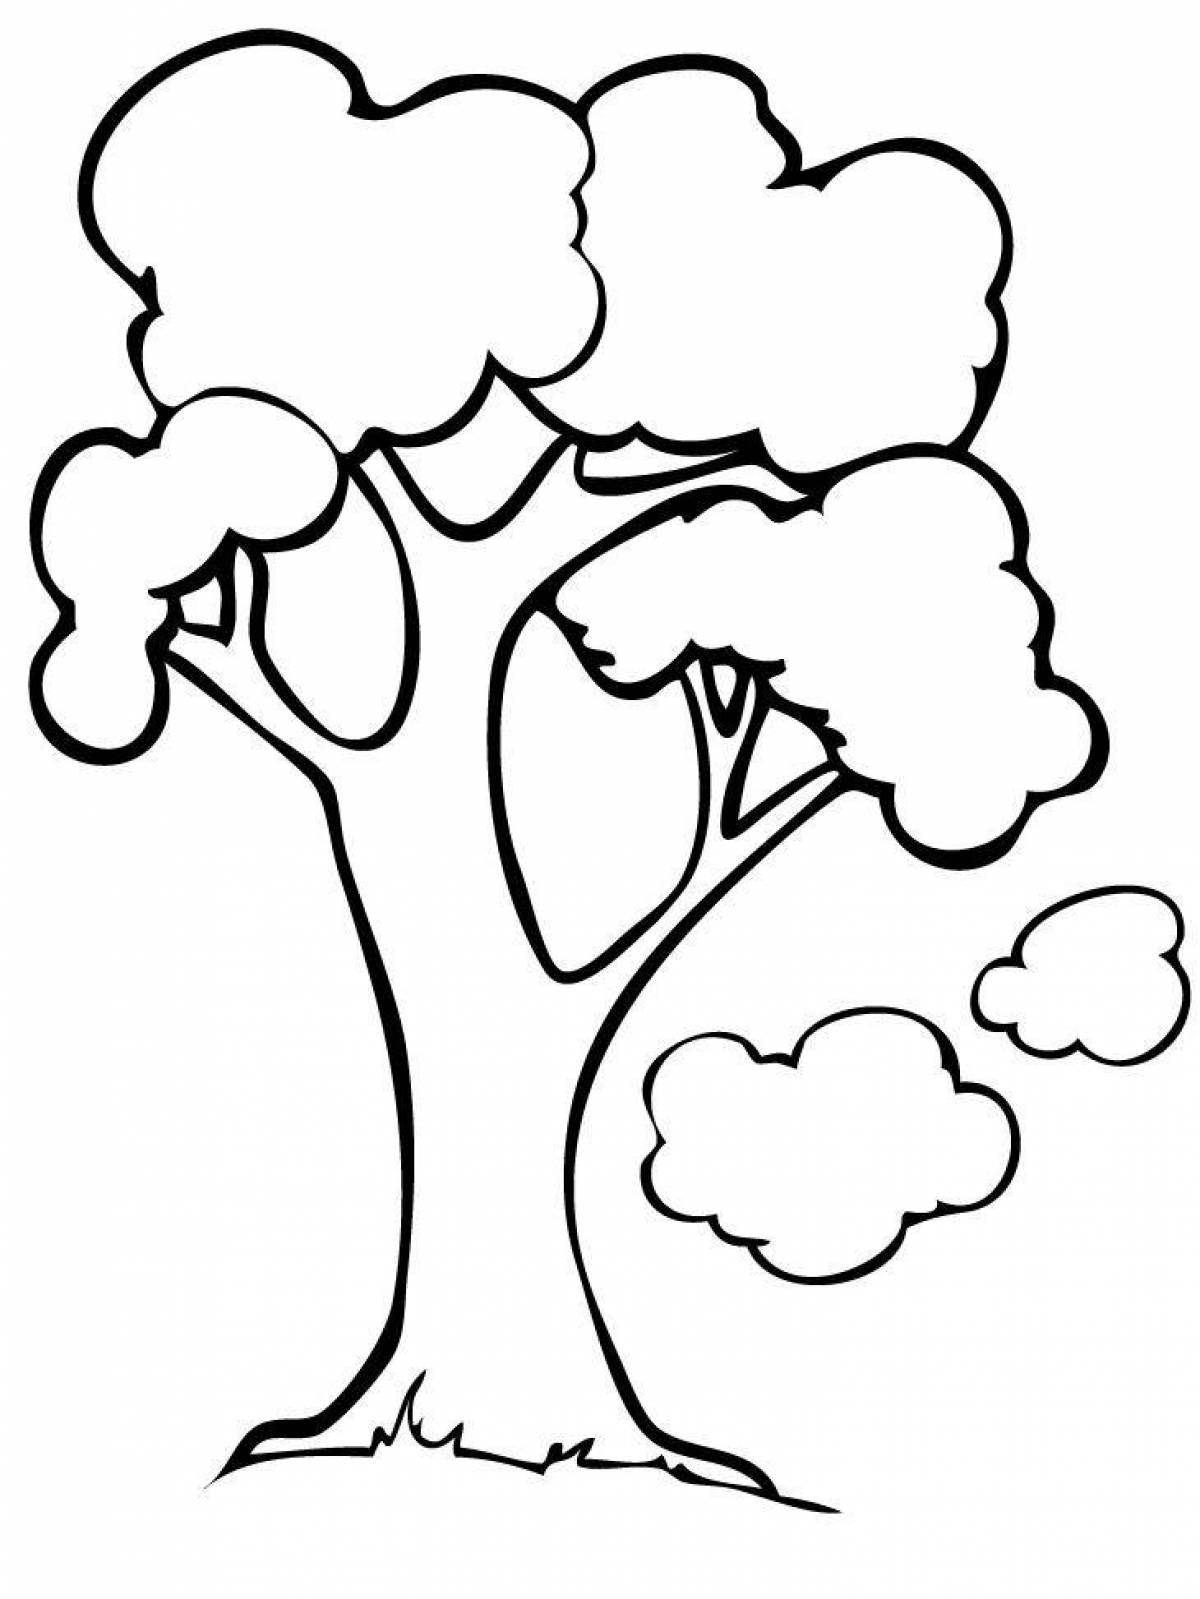 Coloring page with a tempting tree pattern